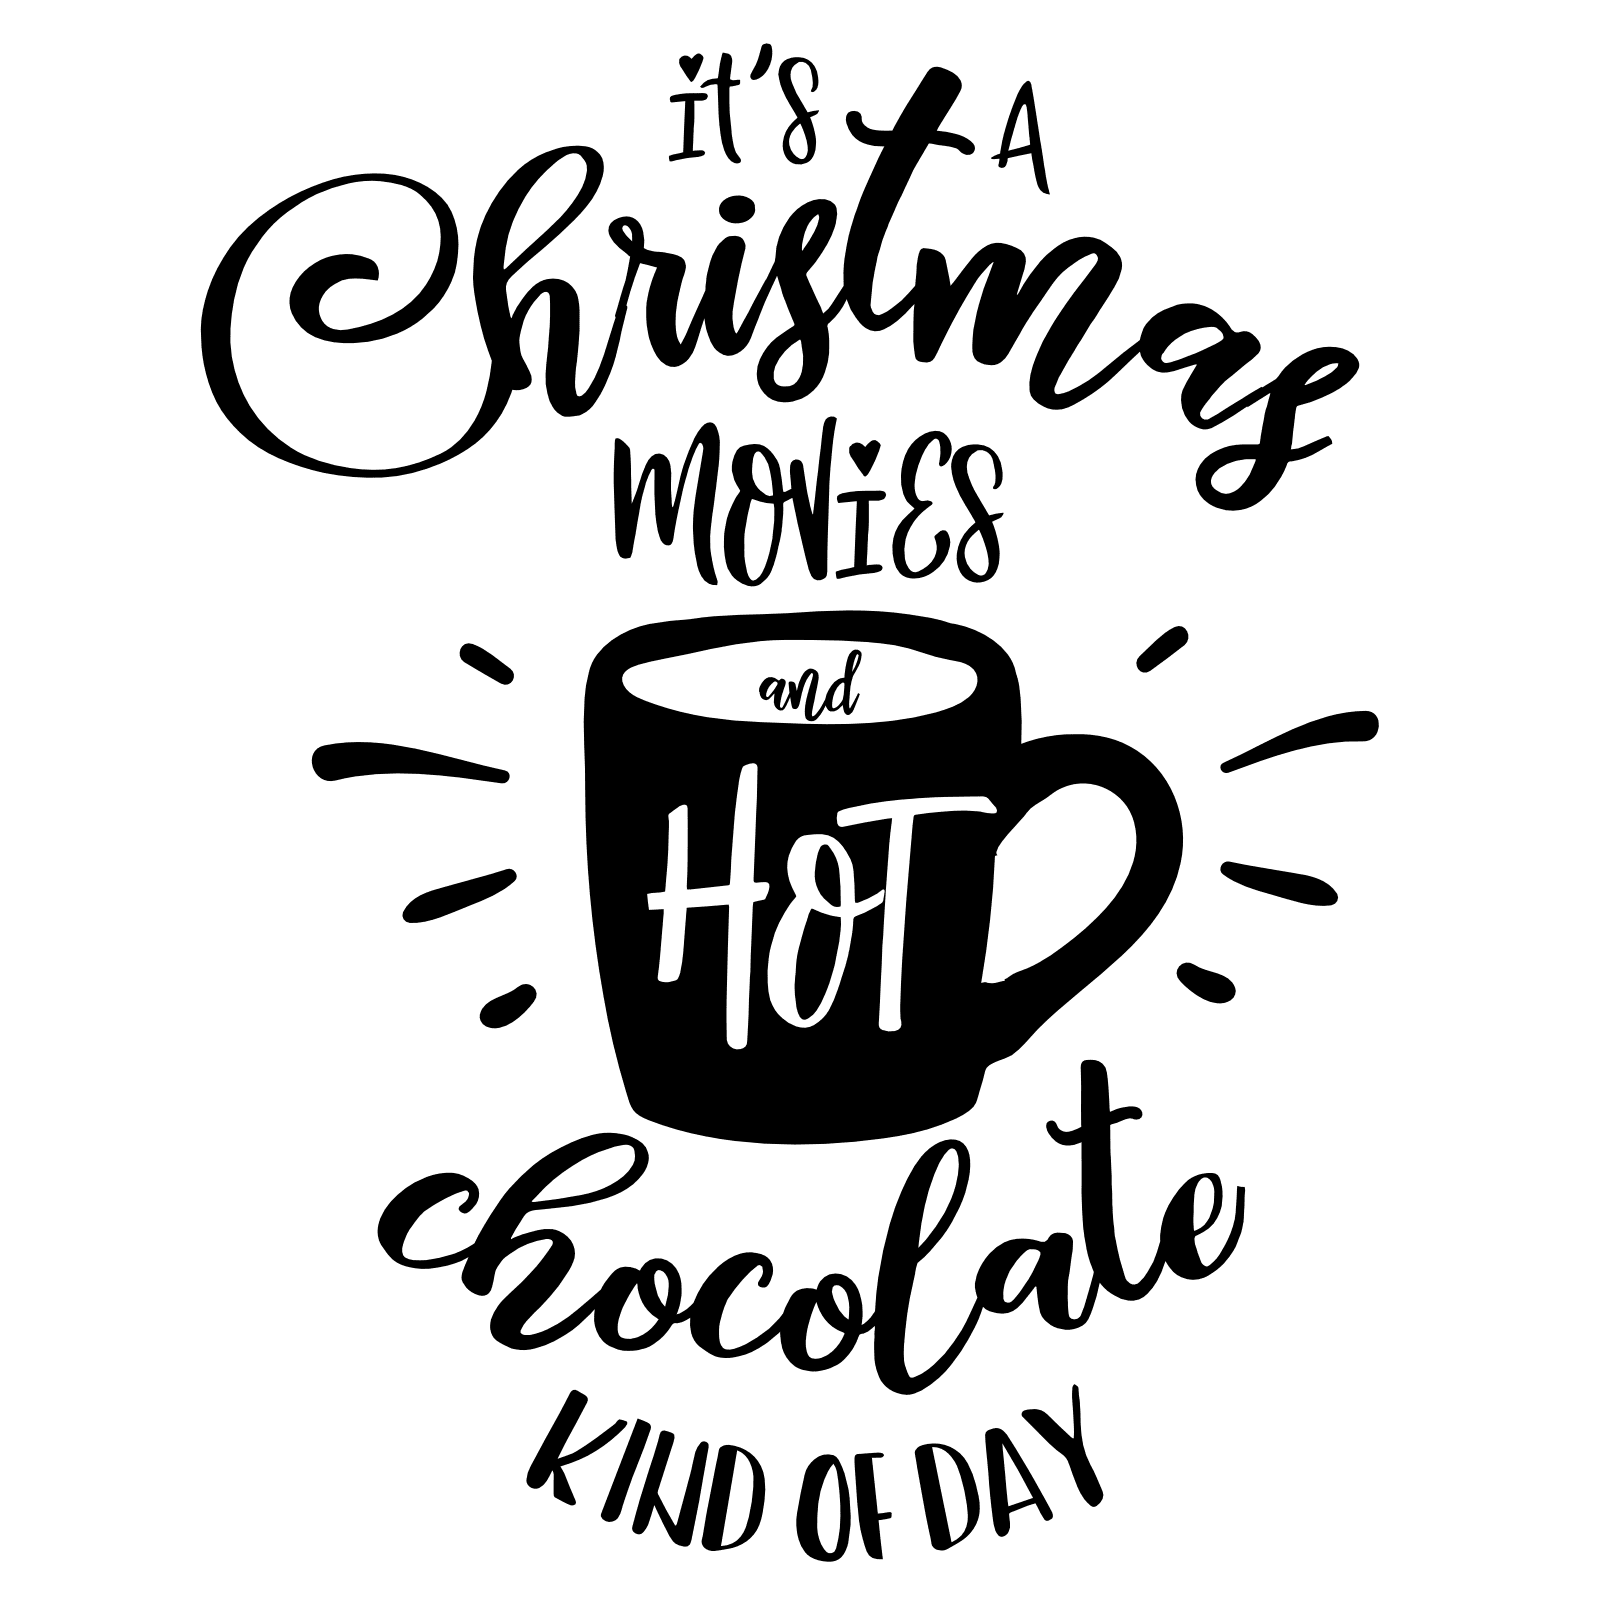 its-a-christmas-movies-and-hot-chocolate-kind-of-day-holiday-free-svg-file-SvgHeart.Com